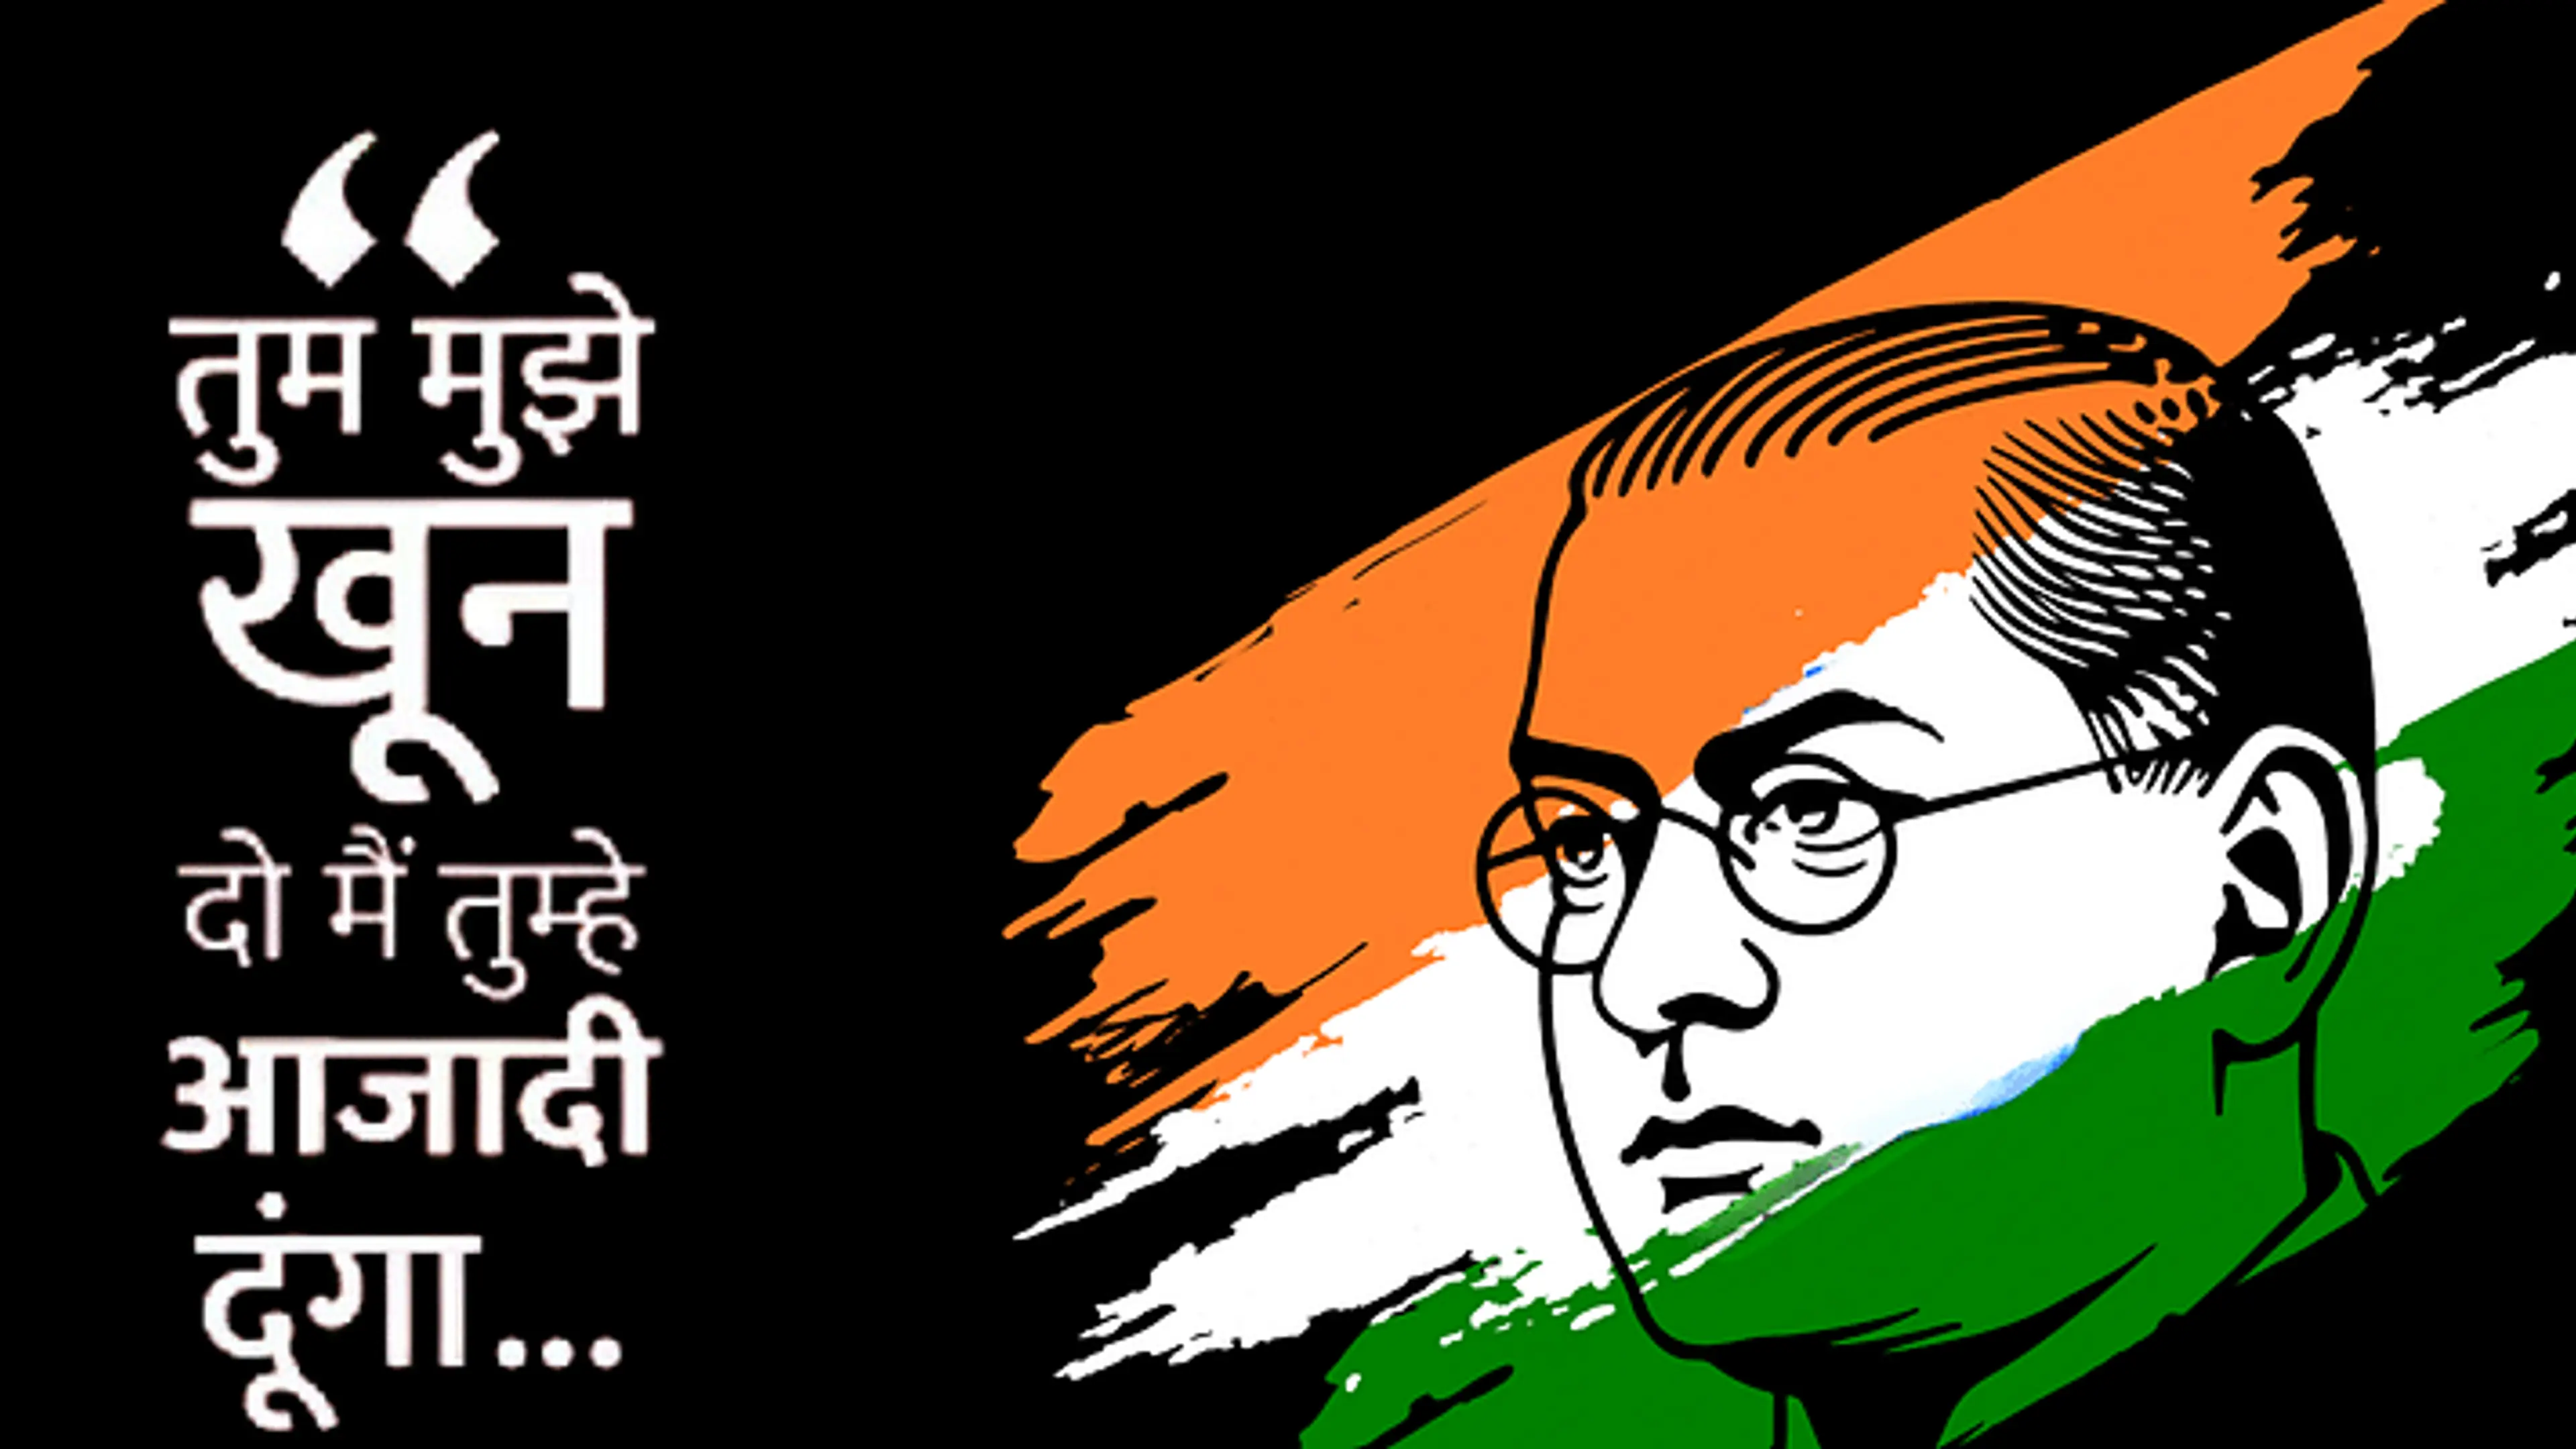 Remembering Bose: The True Architect of Indian Armed Resistance